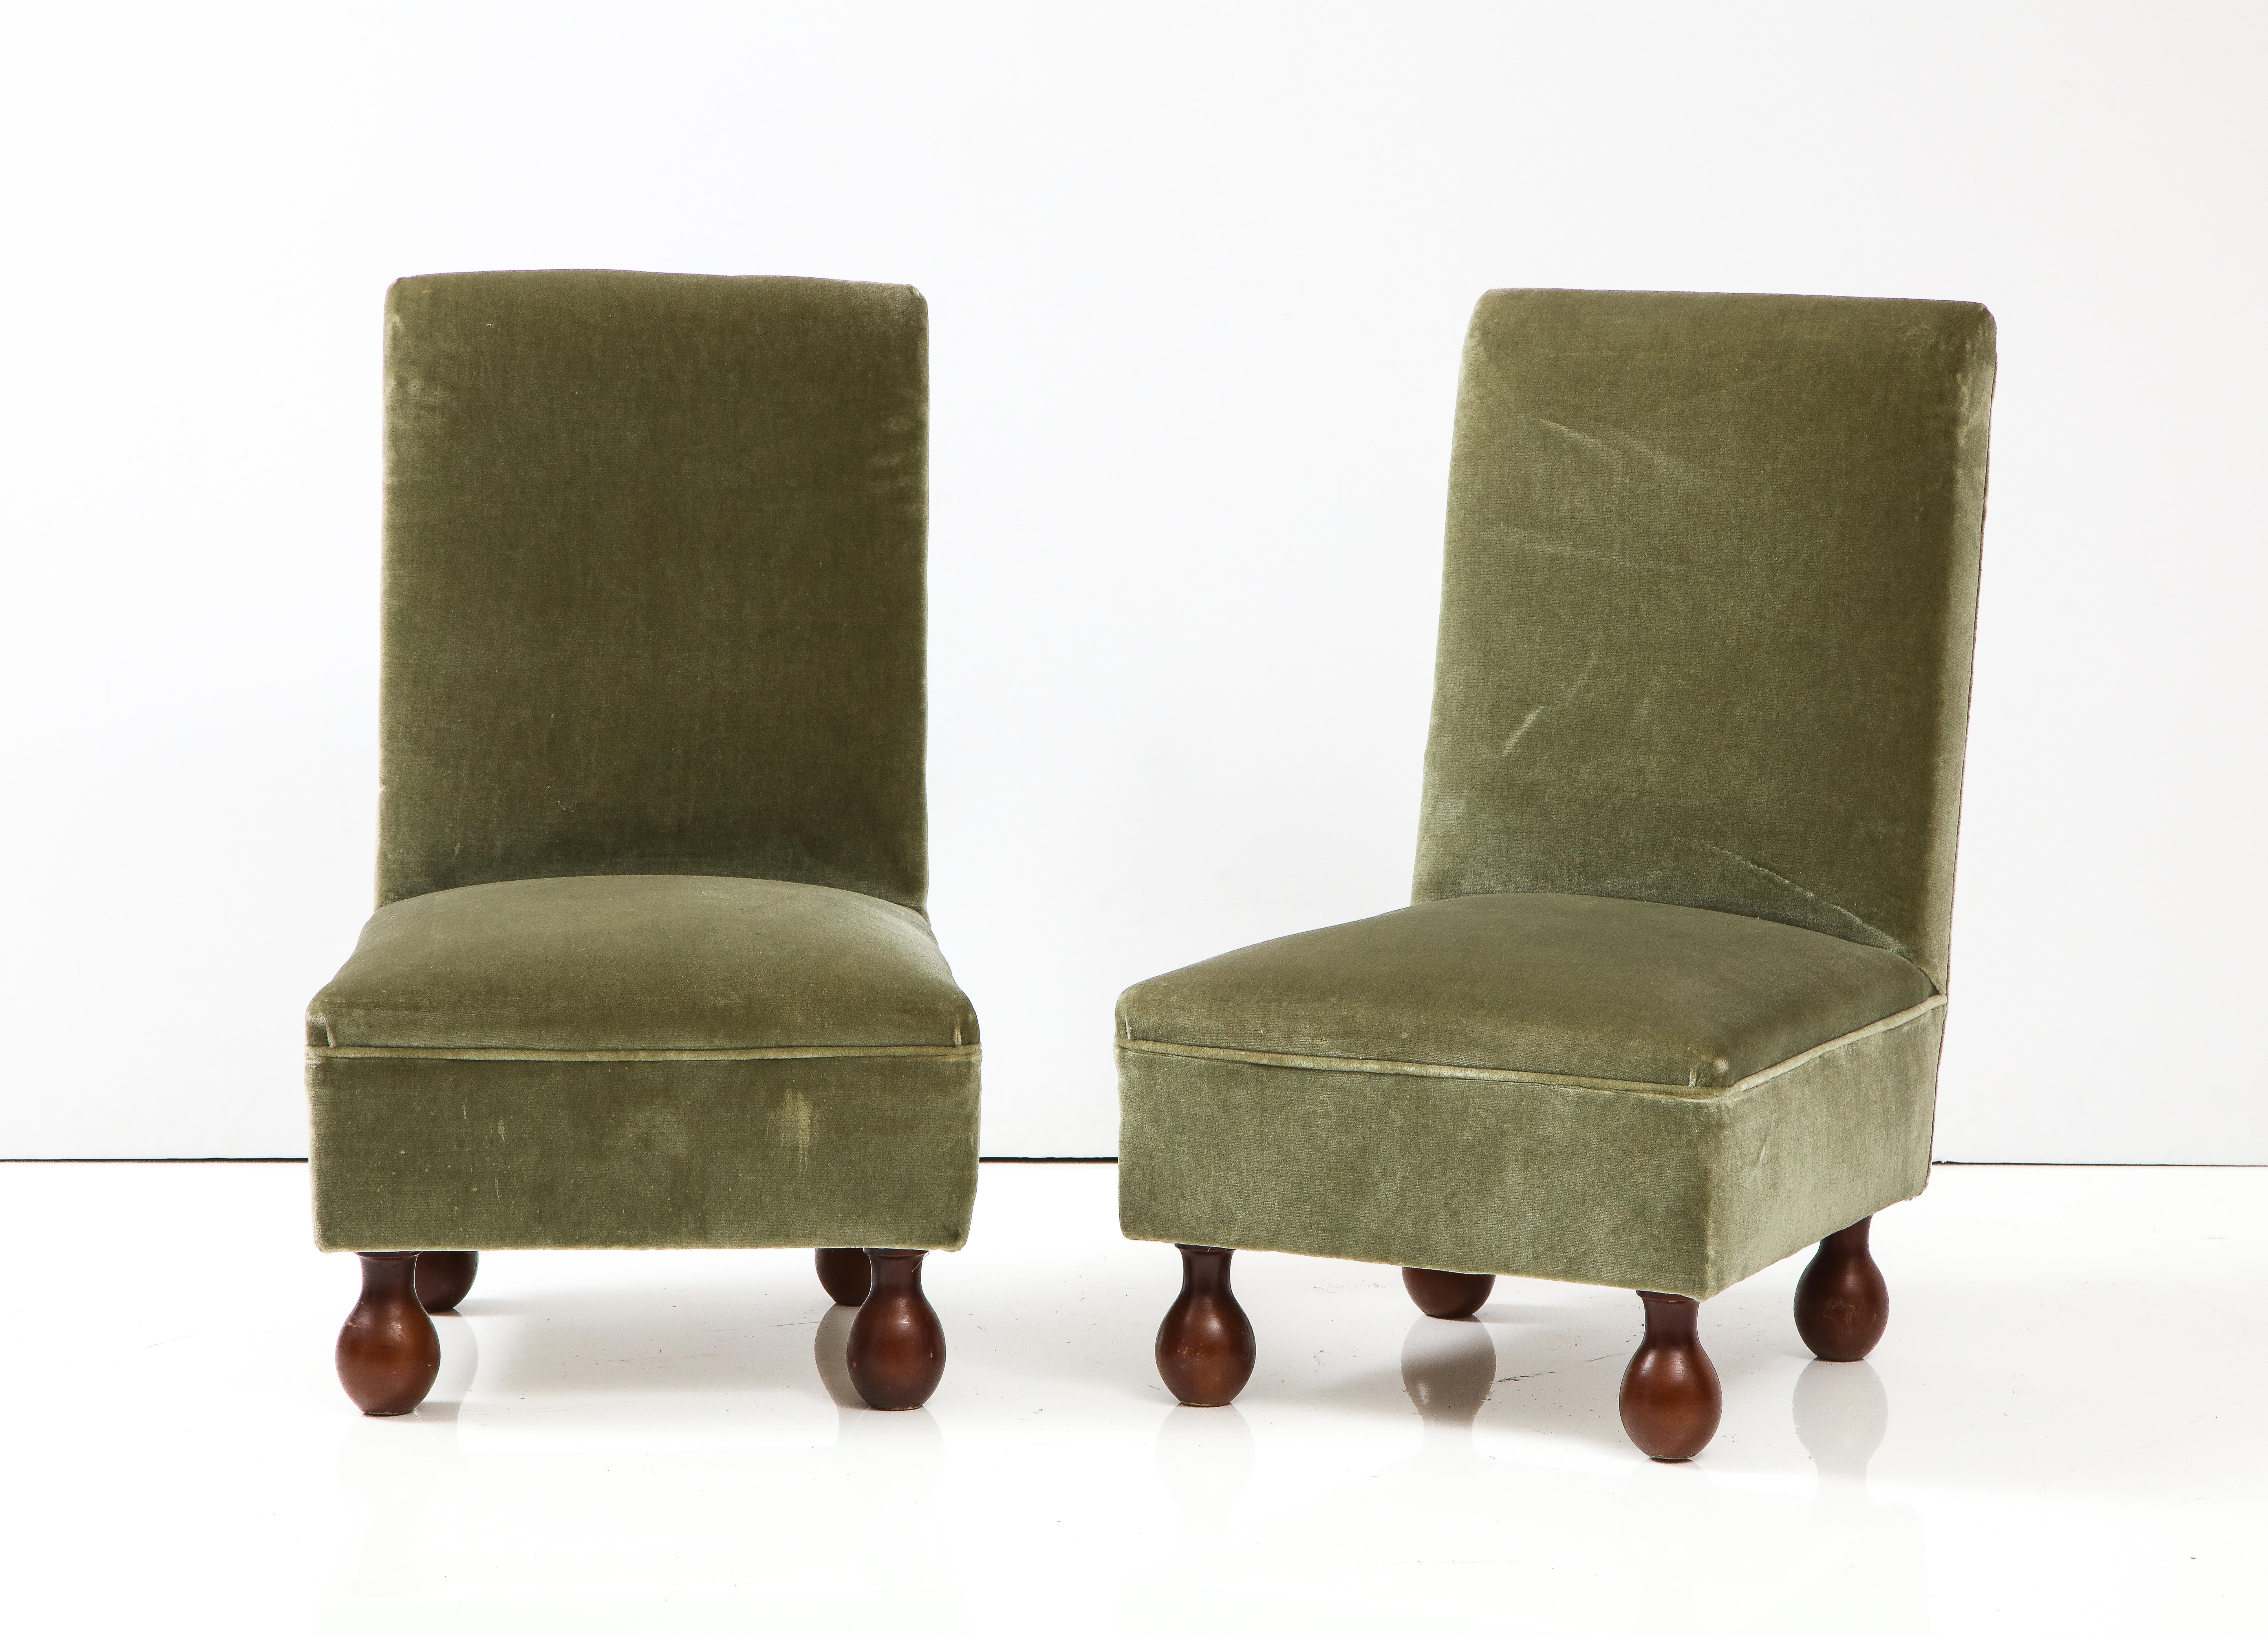 A charming Italian 1940's living room suite, encompassing a sofa, pair of armchairs and a pair of slipper chairs; all upholstered in their original seafoam green velvet, with beautifully curved arms, rectangular backs; supported on walnut bun feet.